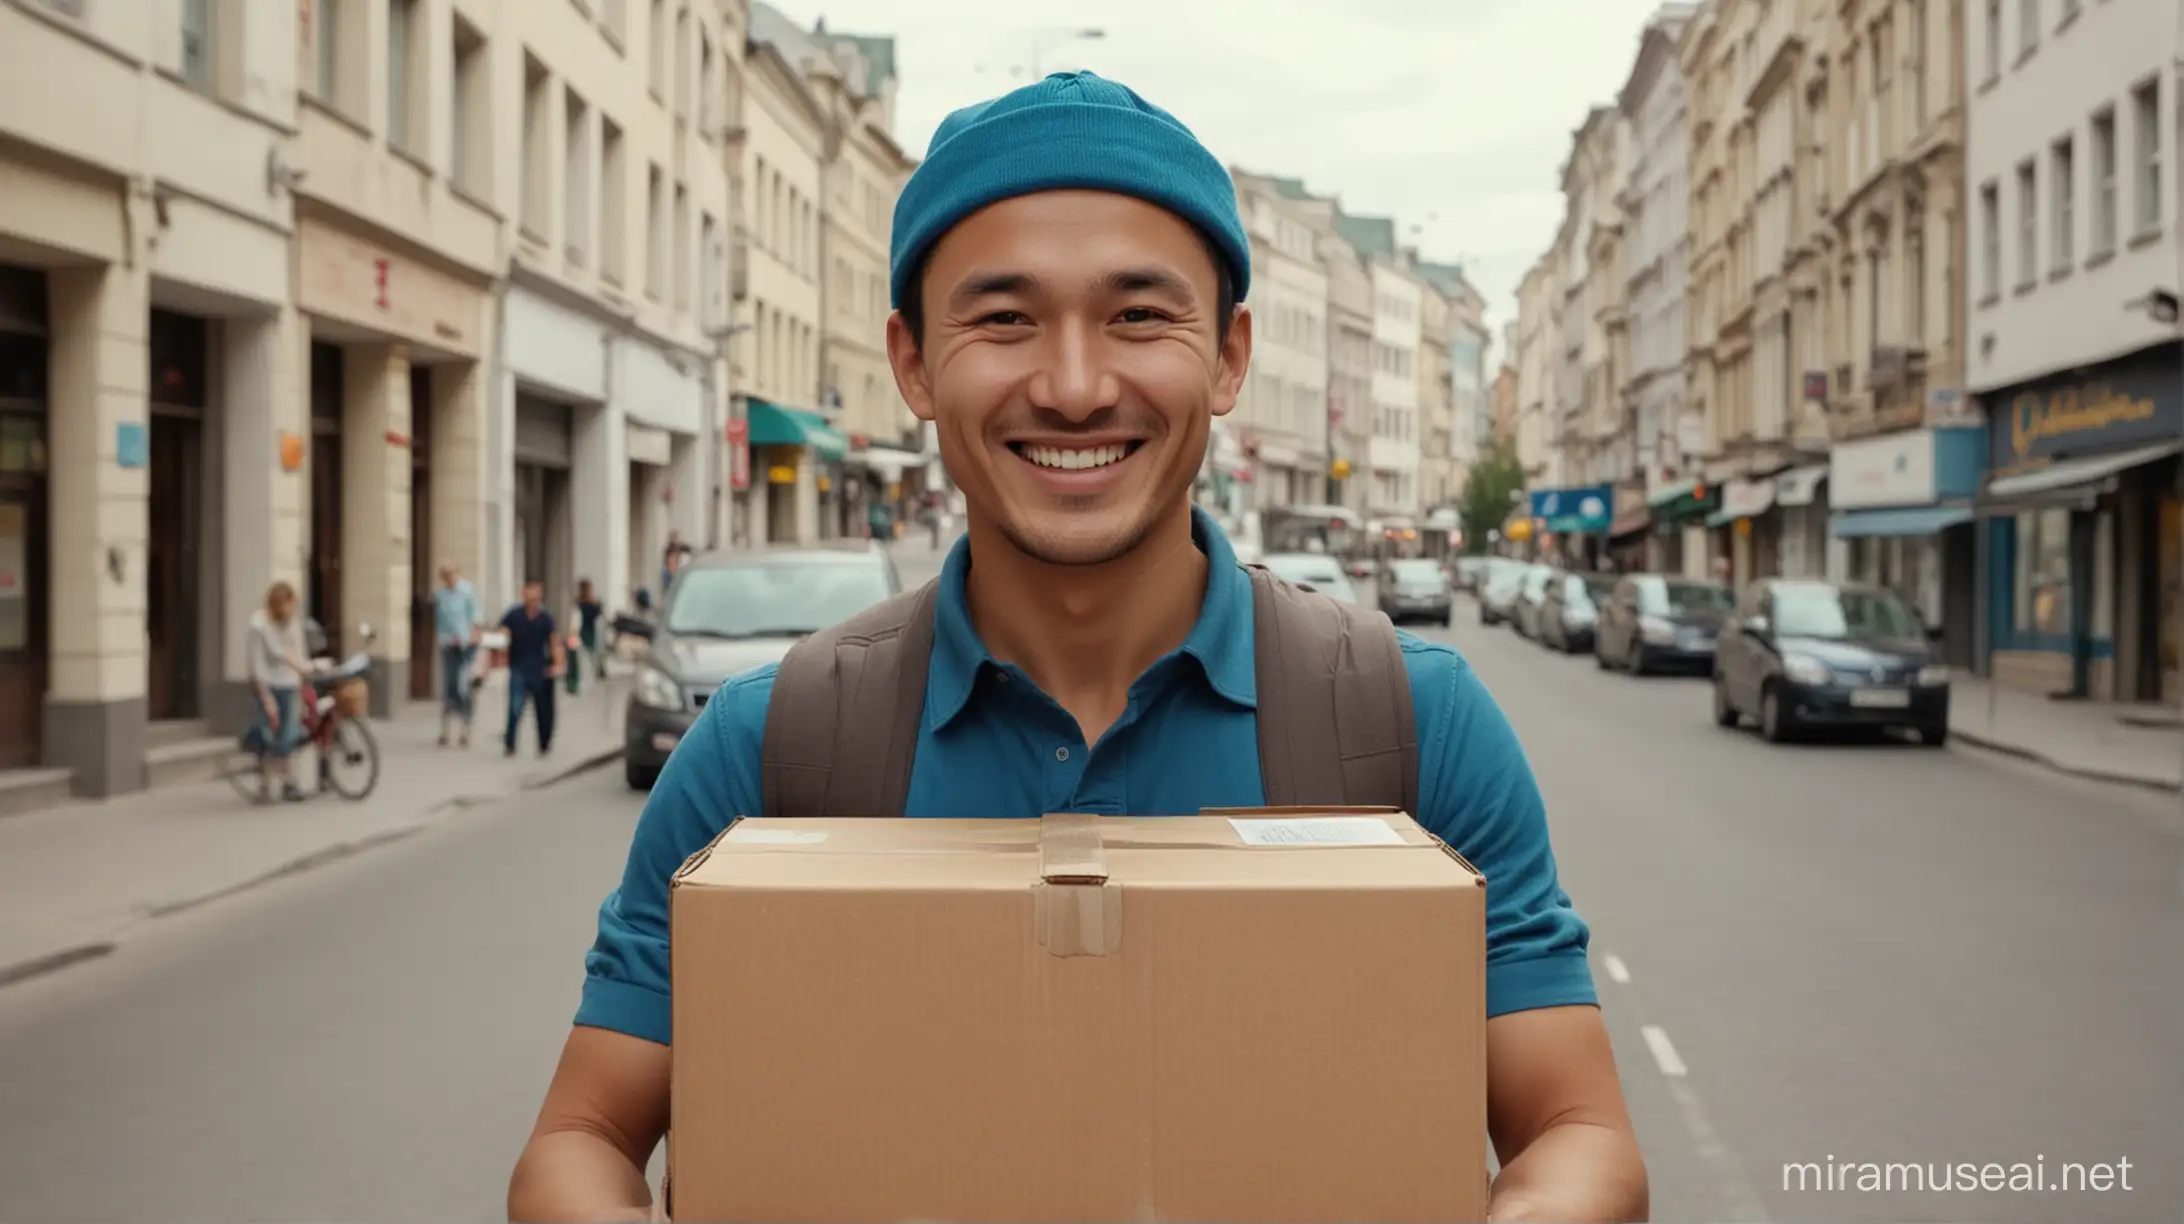 Kazakh Delivery Man Smiling with Package on Busy Street